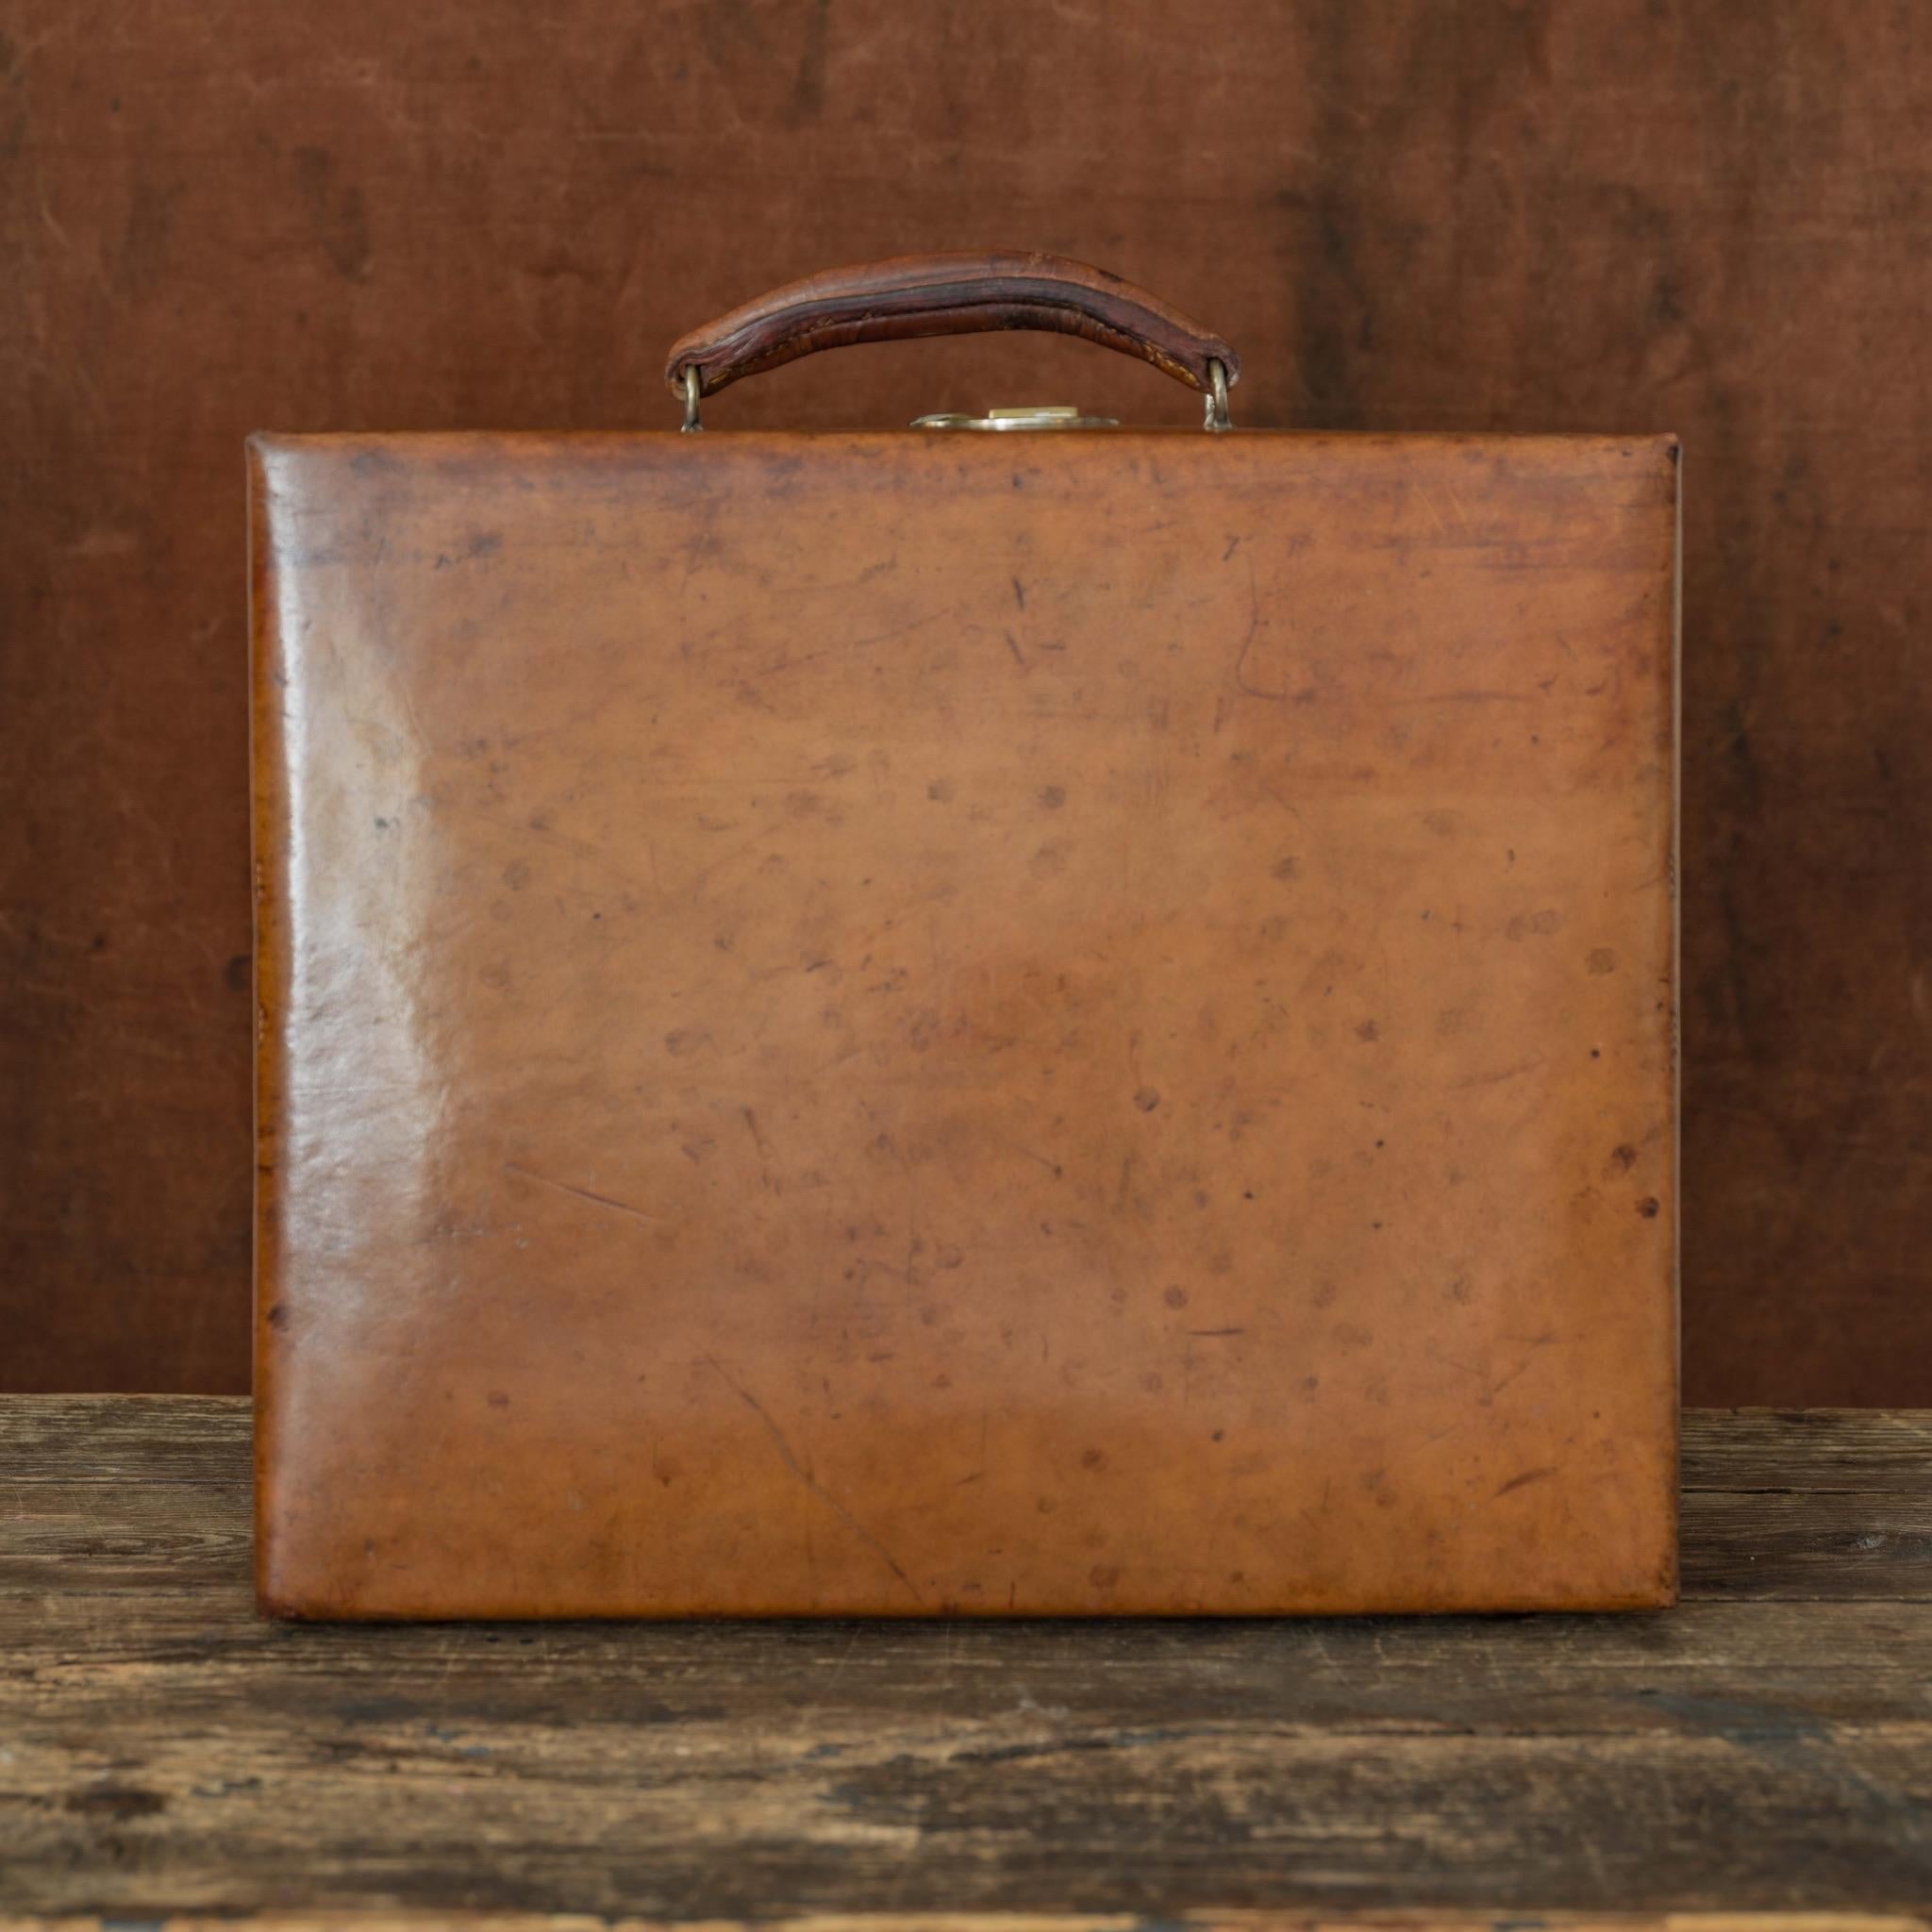 An excellent sturdy tan leather case with solid brass catch and original leather lining with pockets and sleeves to accommodate fittings (now missing). The fittings that remain are the blotter folder, the ink pot and matching vesta case. Circa